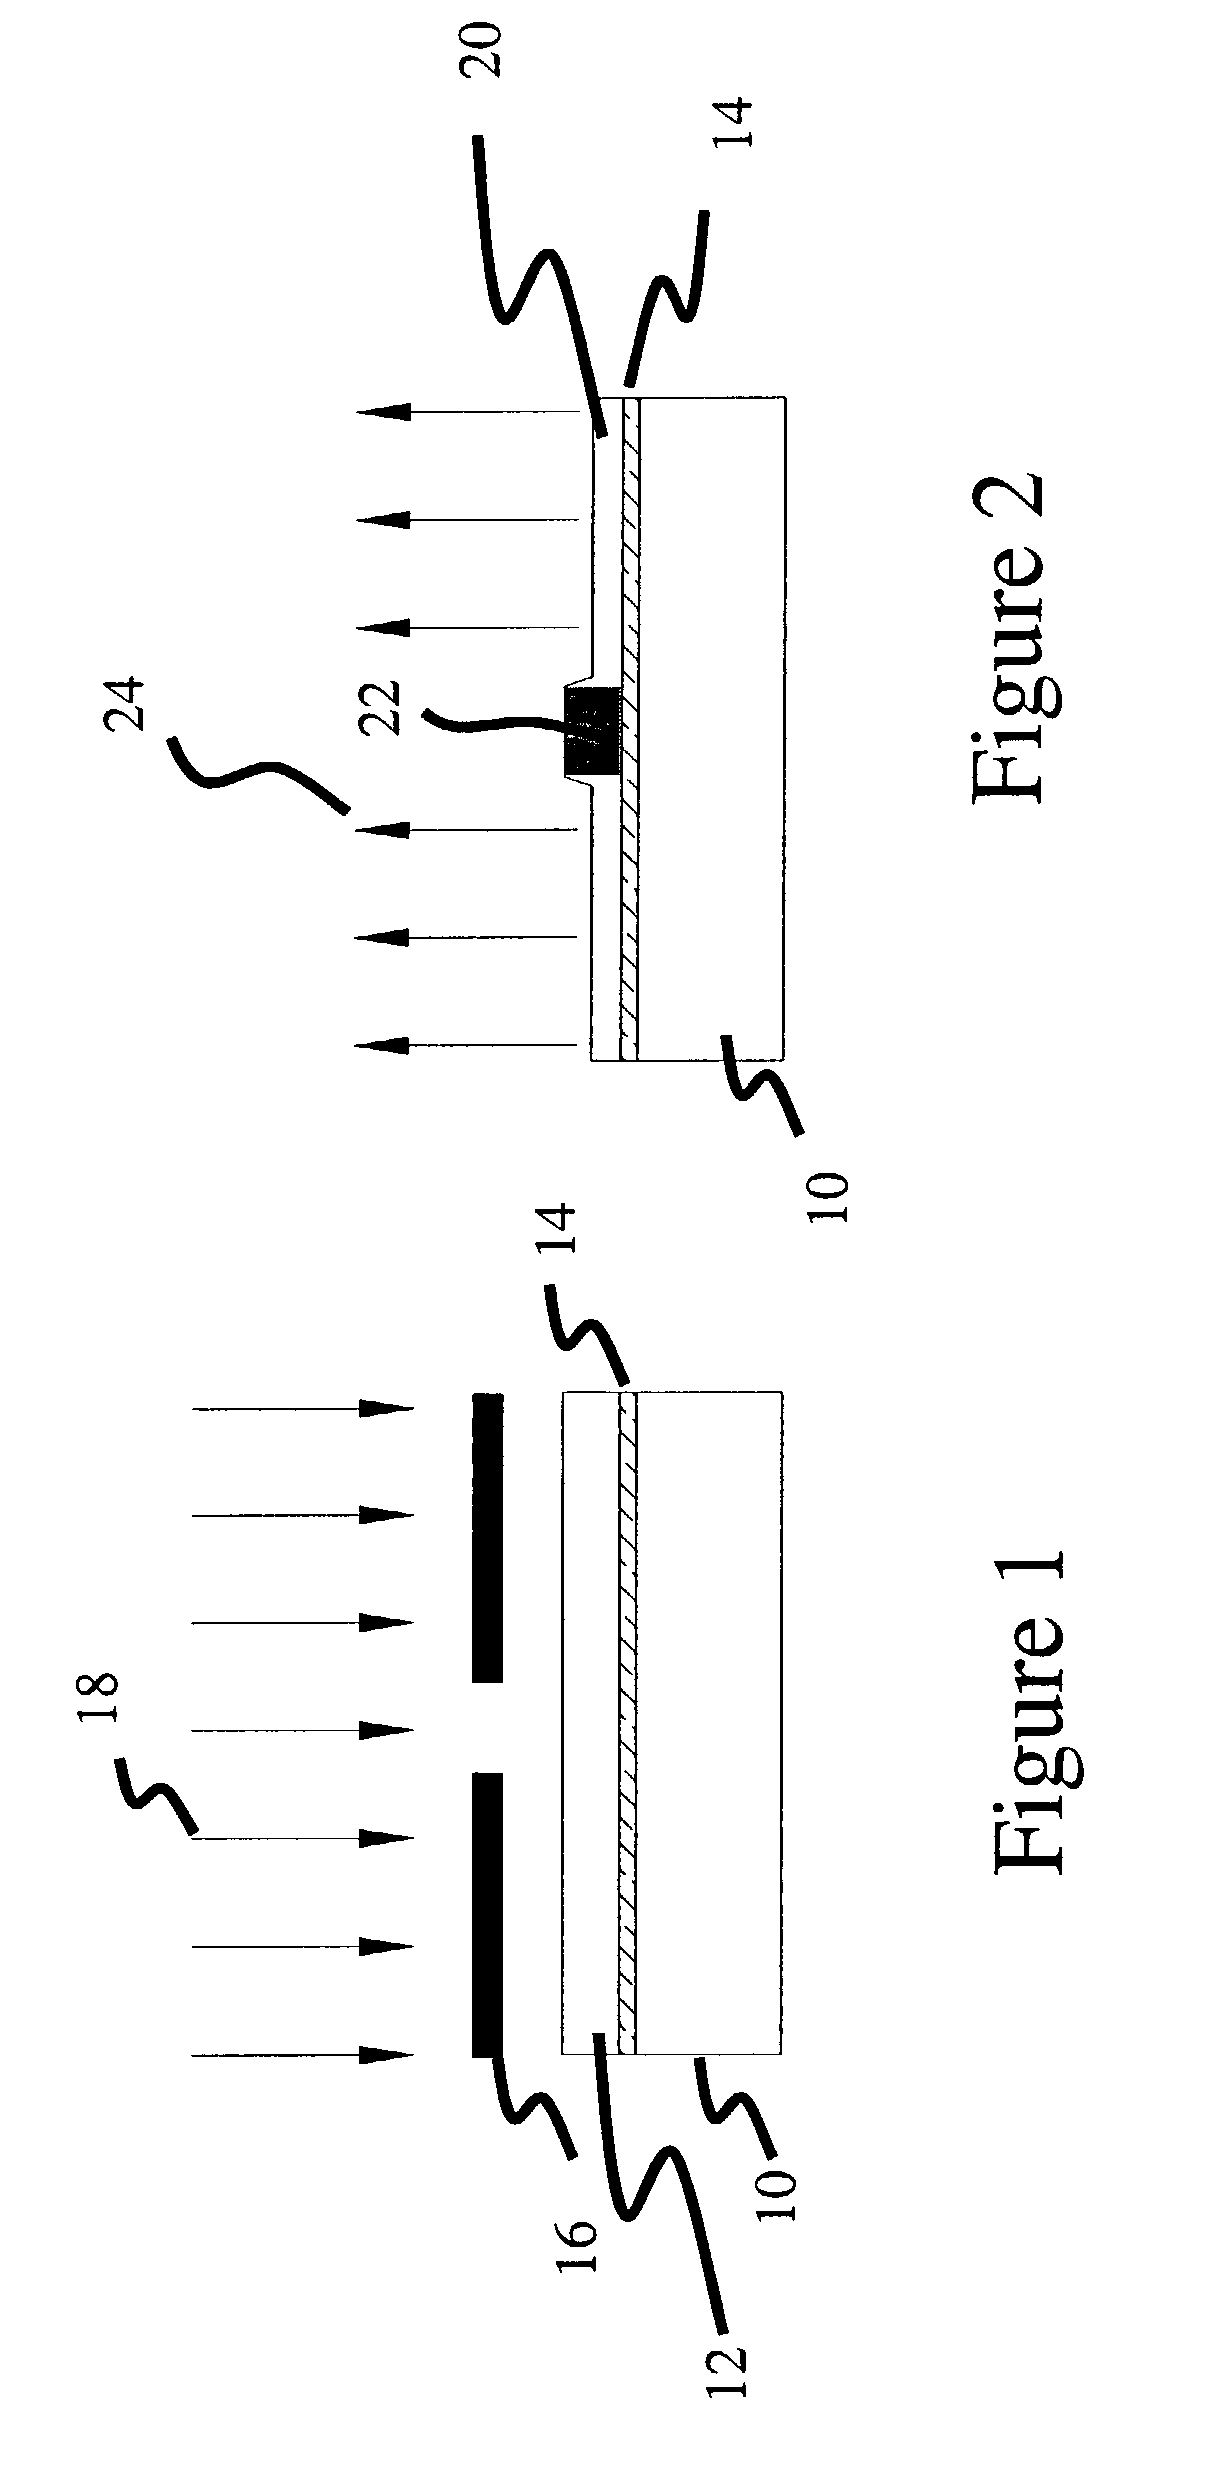 Optical device structures based on photo-definable polymerizable composites